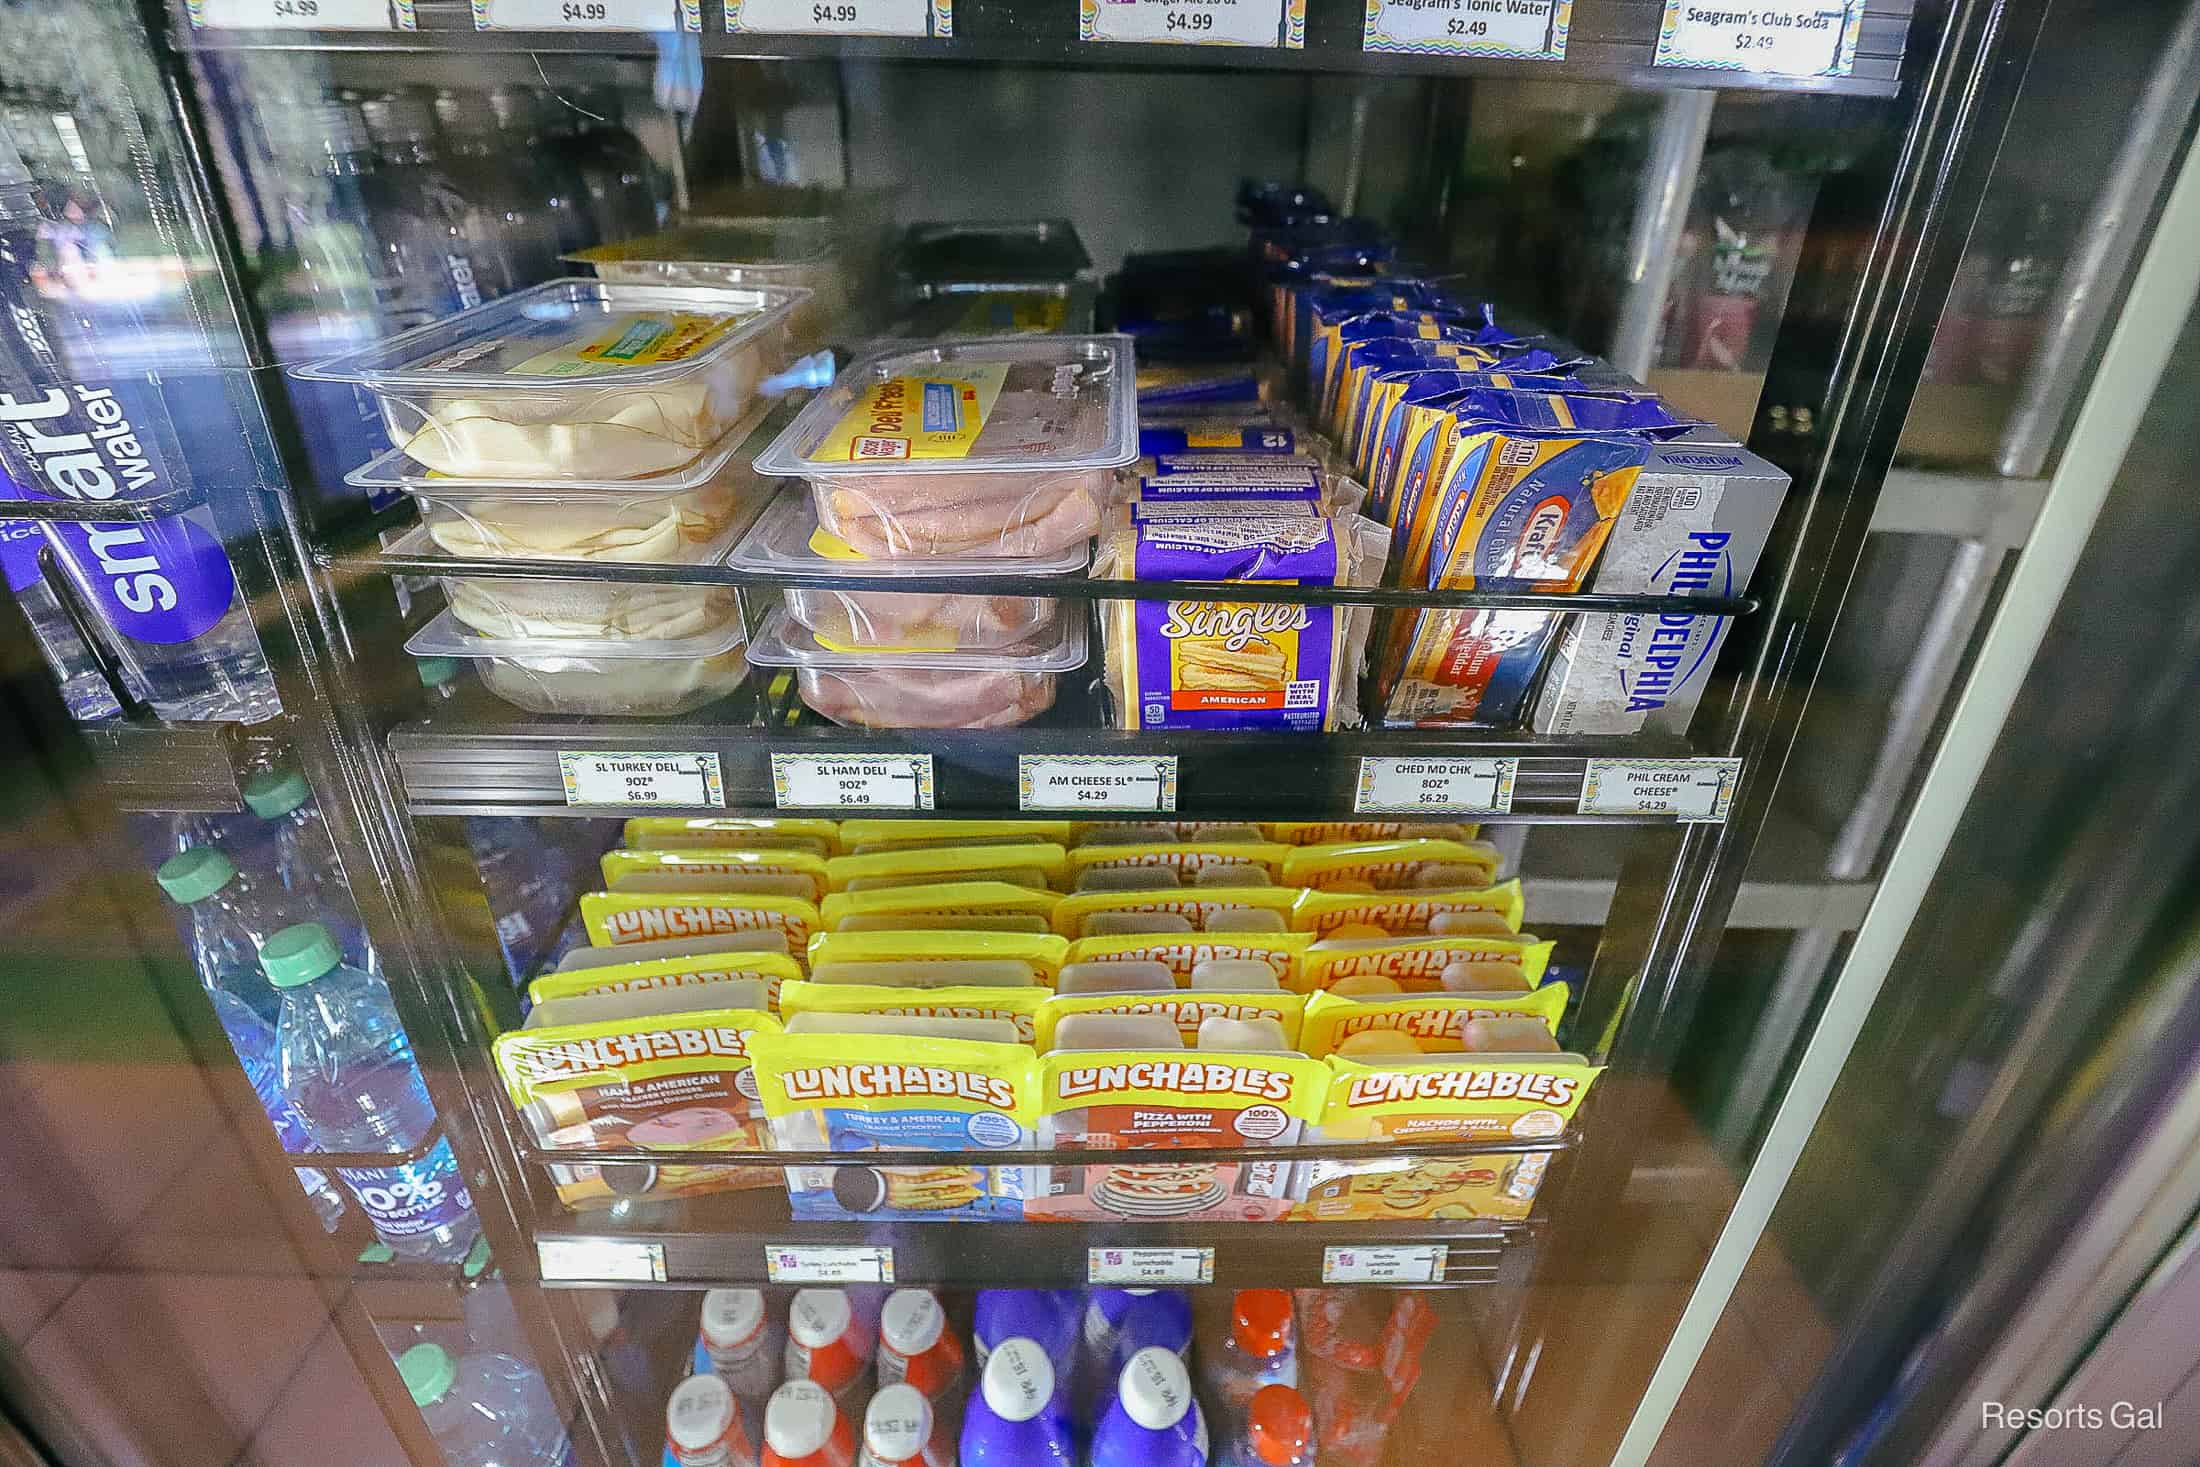 refrigerated items like deli meats, cheese, and Lunchables in Jackson Square Gifts and Desires 